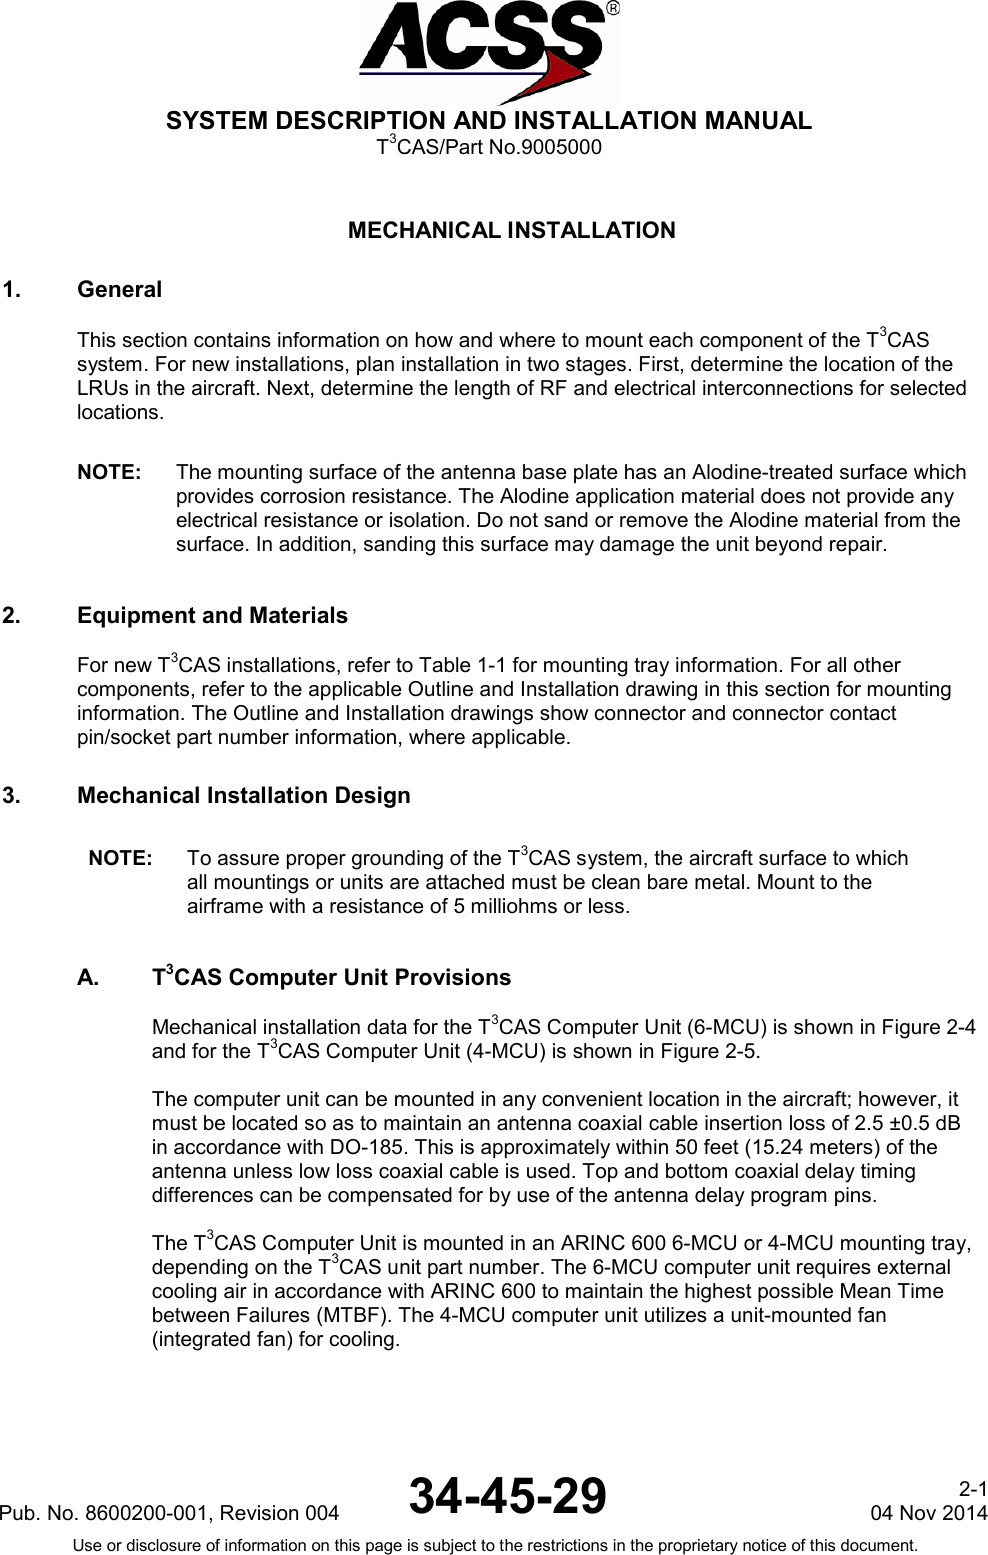  SYSTEM DESCRIPTION AND INSTALLATION MANUAL T3CAS/Part No.9005000  MECHANICAL INSTALLATION 1. General This section contains information on how and where to mount each component of the T3CAS system. For new installations, plan installation in two stages. First, determine the location of the LRUs in the aircraft. Next, determine the length of RF and electrical interconnections for selected locations.  NOTE: The mounting surface of the antenna base plate has an Alodine-treated surface which provides corrosion resistance. The Alodine application material does not provide any electrical resistance or isolation. Do not sand or remove the Alodine material from the surface. In addition, sanding this surface may damage the unit beyond repair. 2. Equipment and Materials For new T3CAS installations, refer to Table 1-1 for mounting tray information. For all other components, refer to the applicable Outline and Installation drawing in this section for mounting information. The Outline and Installation drawings show connector and connector contact pin/socket part number information, where applicable. 3. Mechanical Installation Design NOTE: To assure proper grounding of the T3CAS system, the aircraft surface to which all mountings or units are attached must be clean bare metal. Mount to the airframe with a resistance of 5 milliohms or less. A.  T3CAS Computer Unit Provisions Mechanical installation data for the T3CAS Computer Unit (6-MCU) is shown in Figure 2-4 and for the T3CAS Computer Unit (4-MCU) is shown in Figure 2-5.  The computer unit can be mounted in any convenient location in the aircraft; however, it must be located so as to maintain an antenna coaxial cable insertion loss of 2.5 ±0.5 dB in accordance with DO-185. This is approximately within 50 feet (15.24 meters) of the antenna unless low loss coaxial cable is used. Top and bottom coaxial delay timing differences can be compensated for by use of the antenna delay program pins.  The T3CAS Computer Unit is mounted in an ARINC 600 6-MCU or 4-MCU mounting tray, depending on the T3CAS unit part number. The 6-MCU computer unit requires external cooling air in accordance with ARINC 600 to maintain the highest possible Mean Time between Failures (MTBF). The 4-MCU computer unit utilizes a unit-mounted fan (integrated fan) for cooling.  Pub. No. 8600200-001, Revision 004 34-45-29 2-1 04 Nov 2014 Use or disclosure of information on this page is subject to the restrictions in the proprietary notice of this document.  